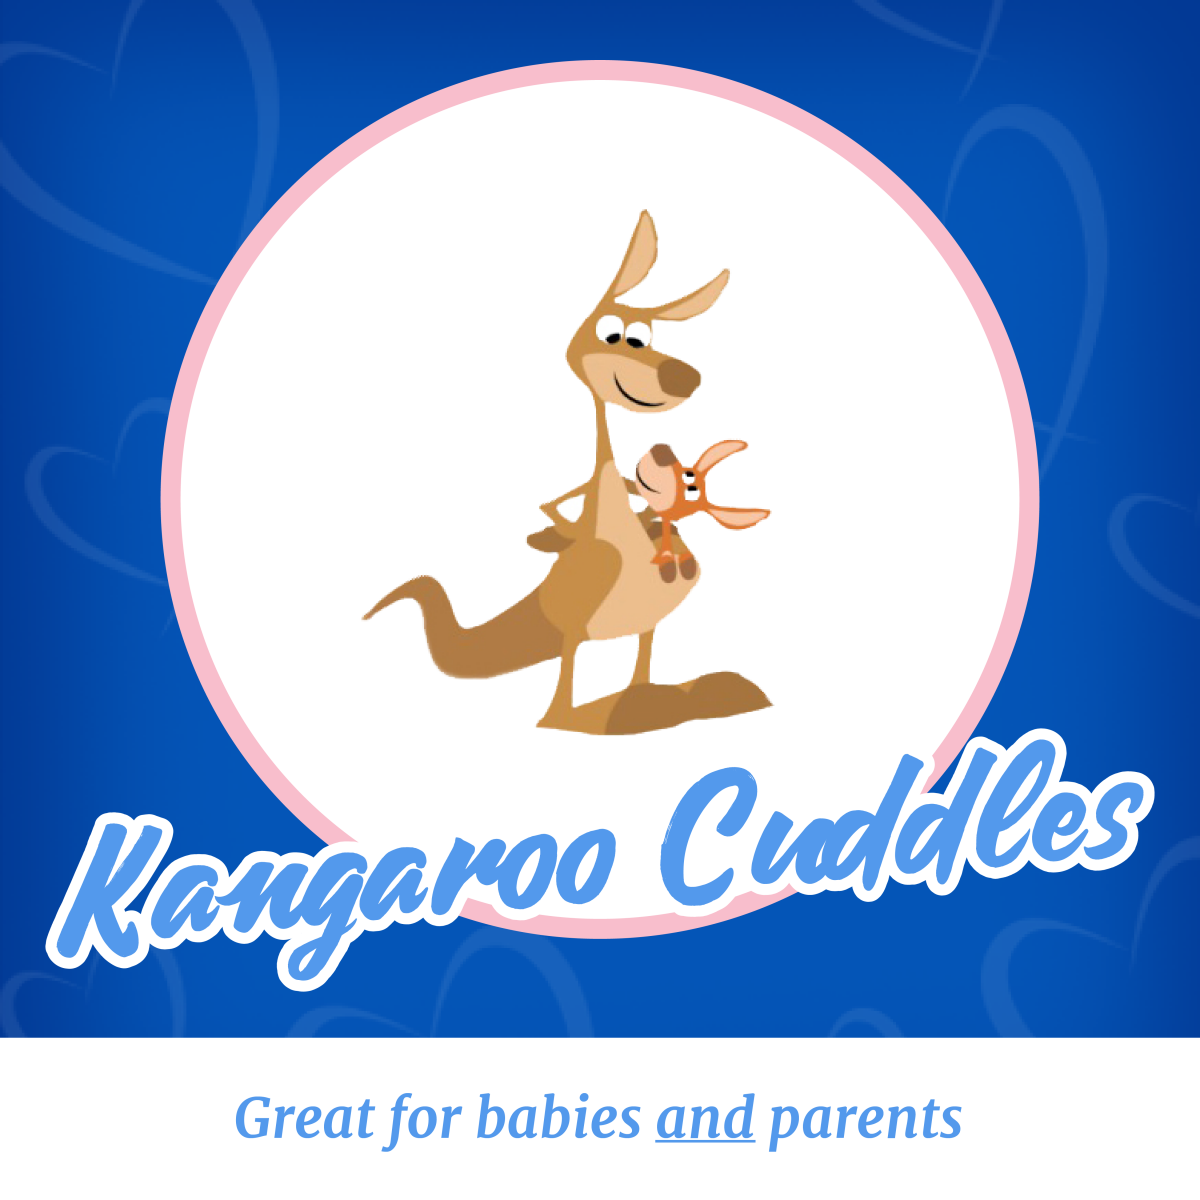 Kangaroo Cuddles is great for both babies and the parents